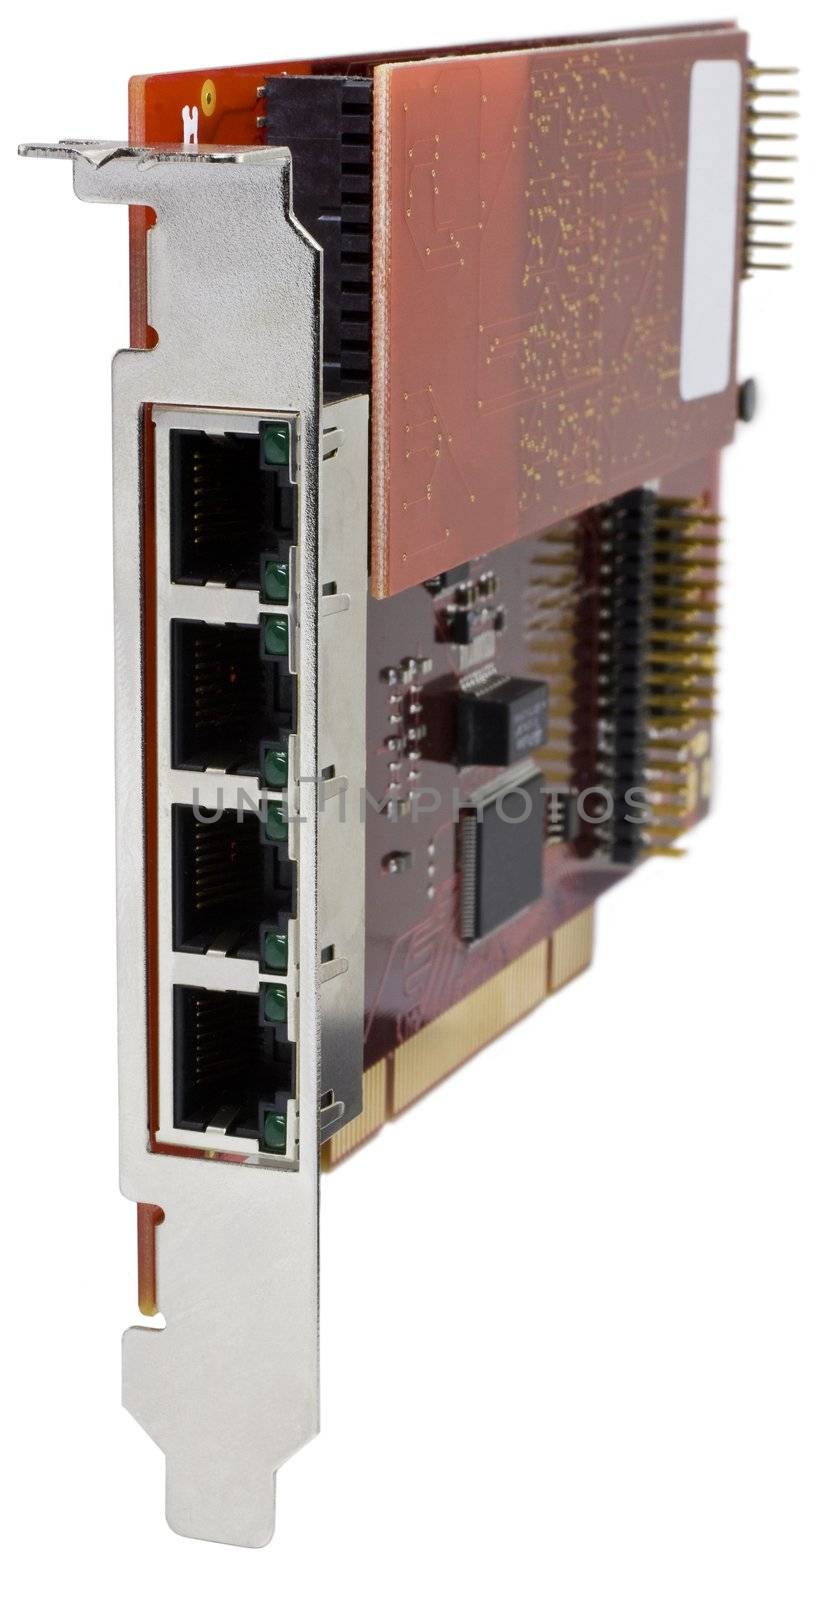 PCI-X Card with three FireWire 800 connectors. White background. The card is used to connect professional audio and video equipment.